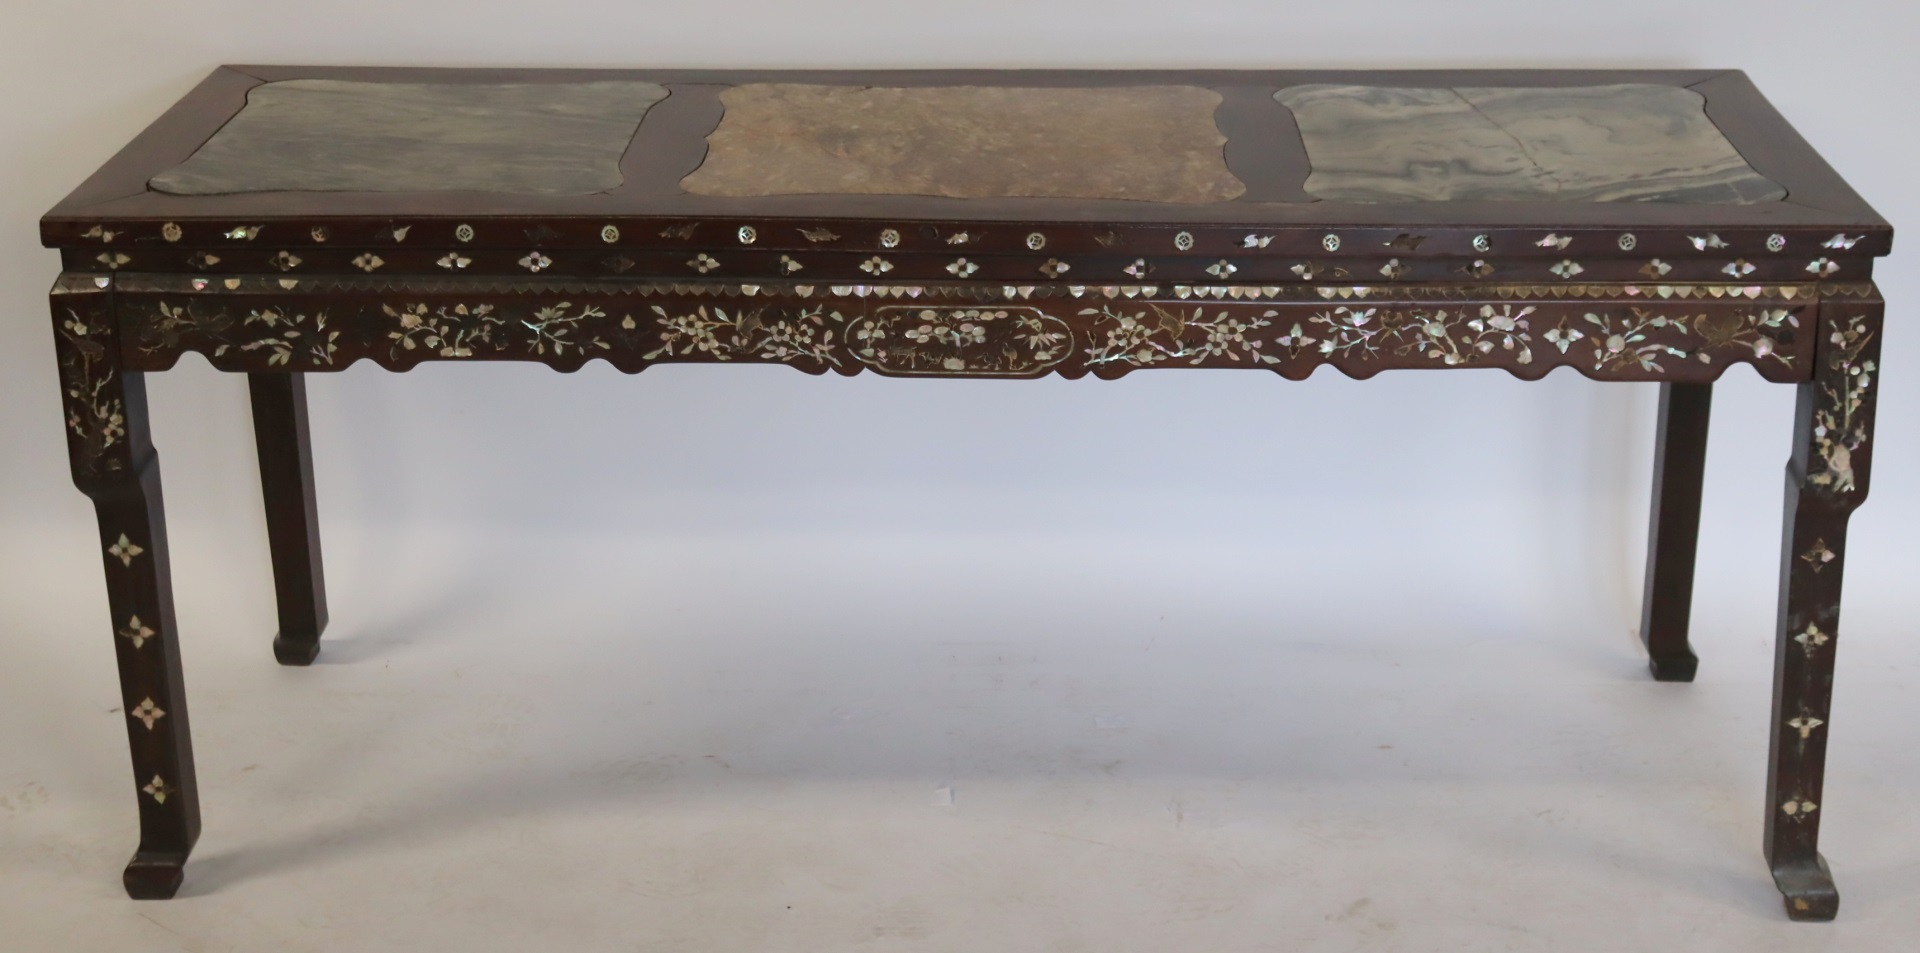 ANTIQUE INLAID HARD WOOD TABLE  3be87b